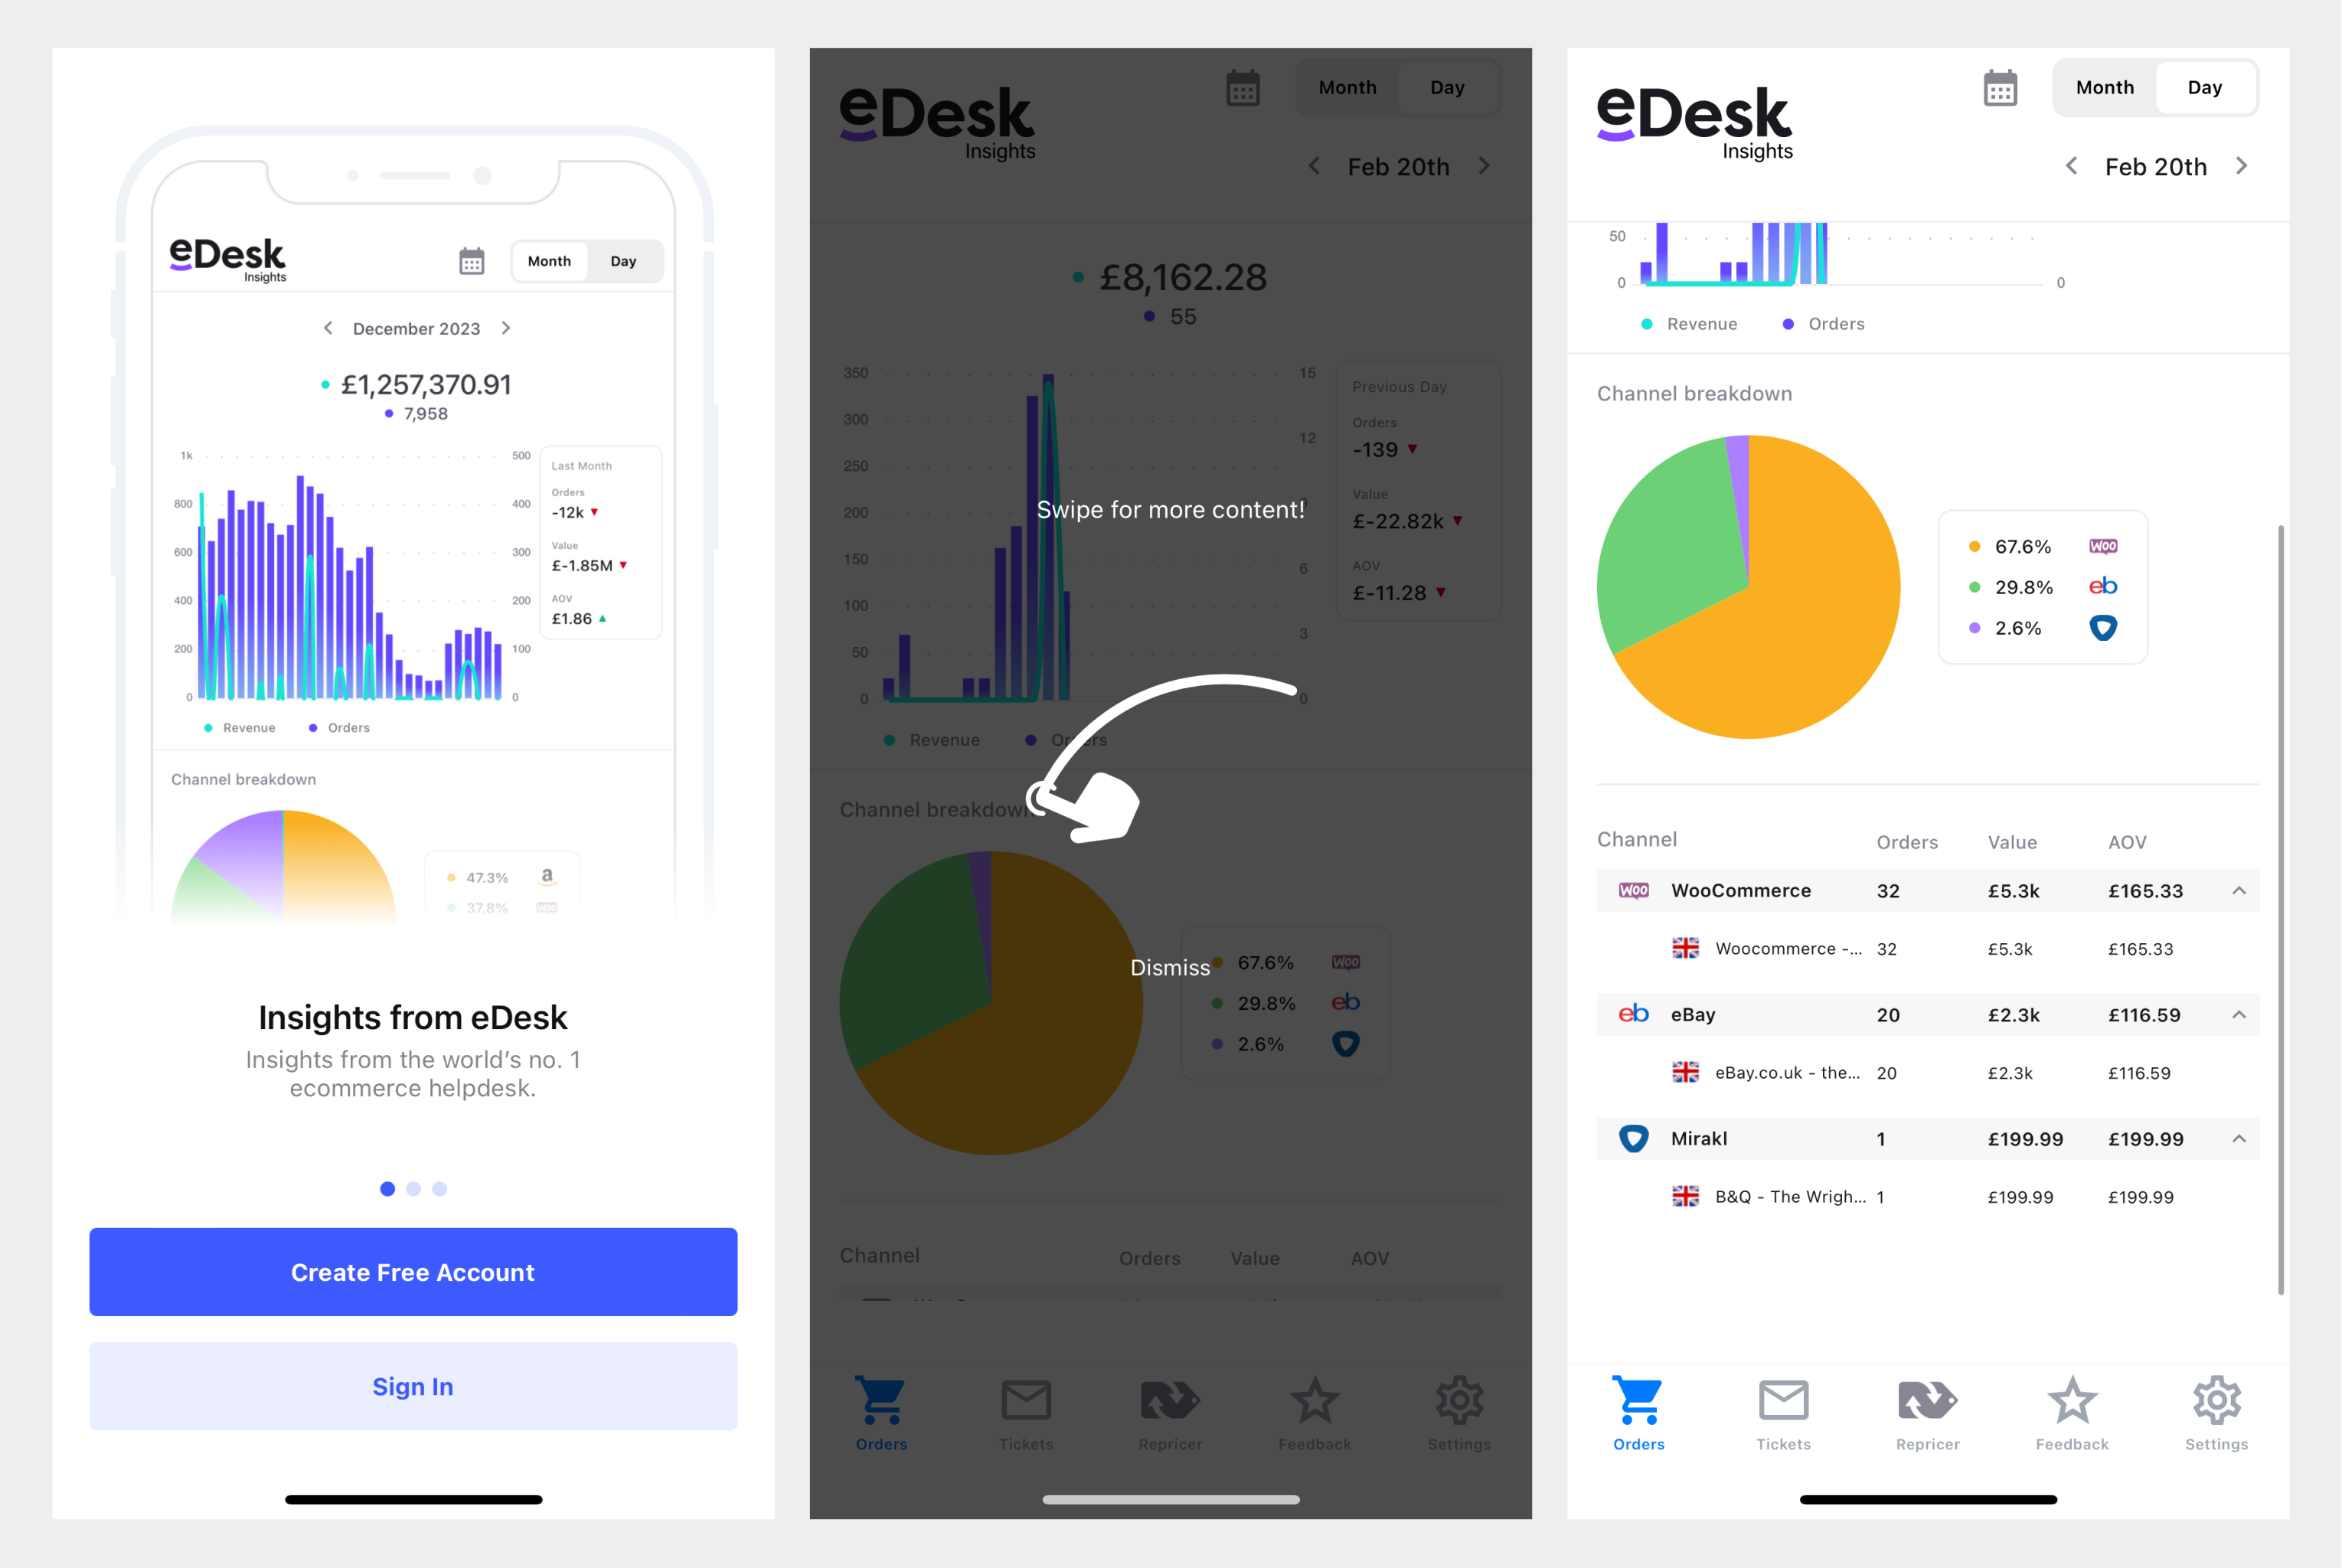 eDesk Insights - the mobile app